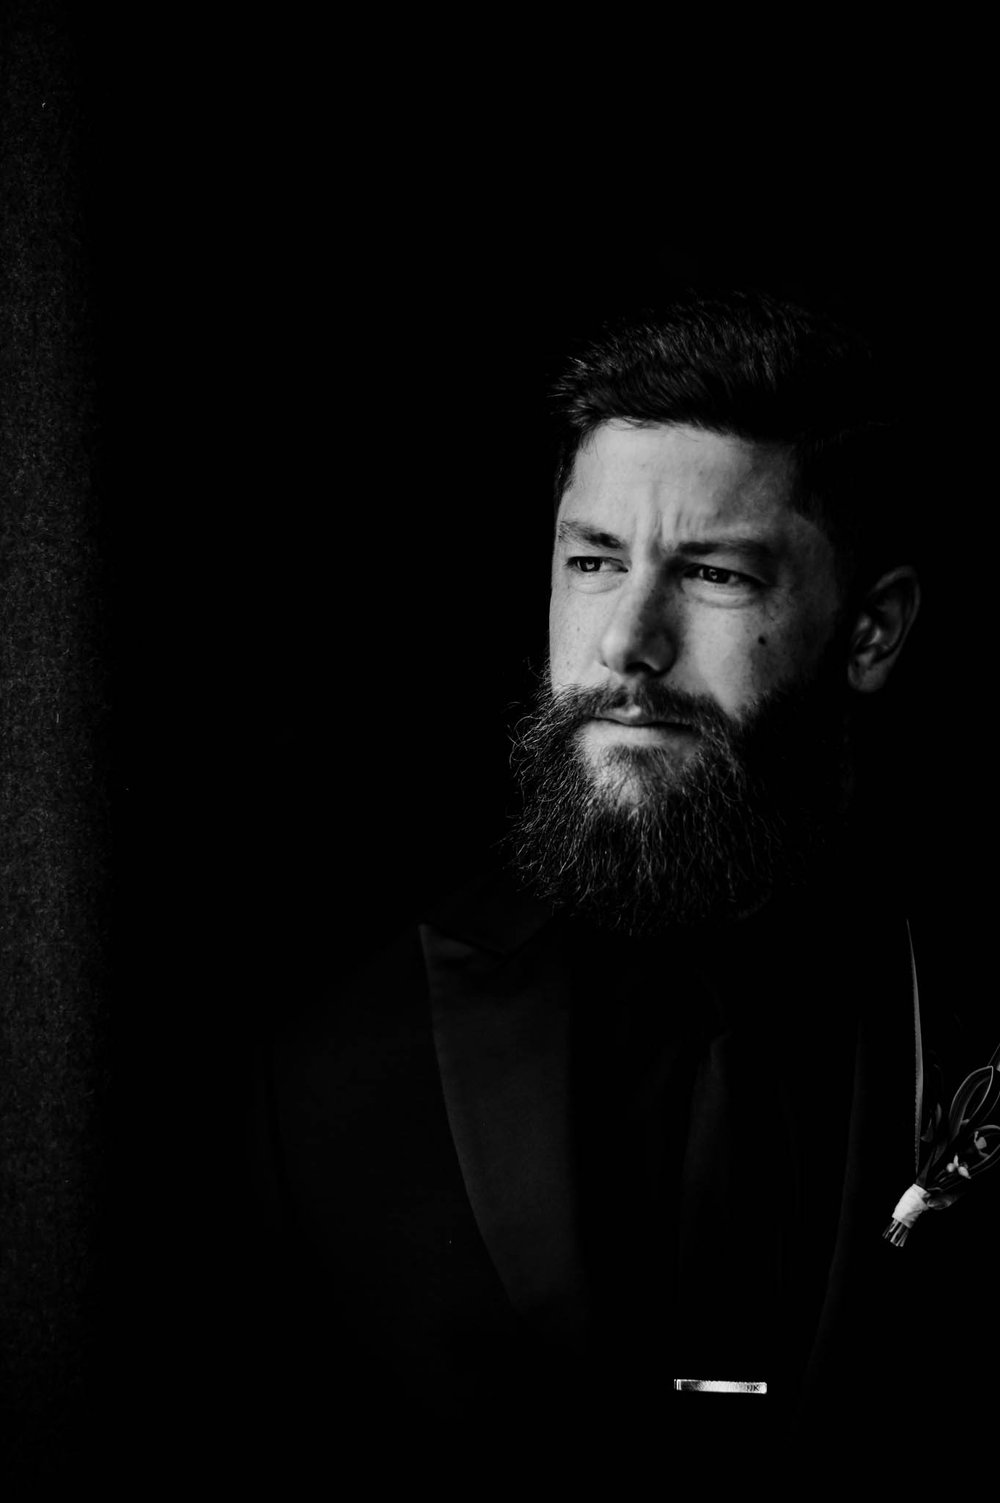 groom poses in dark dramatic light before the wedding